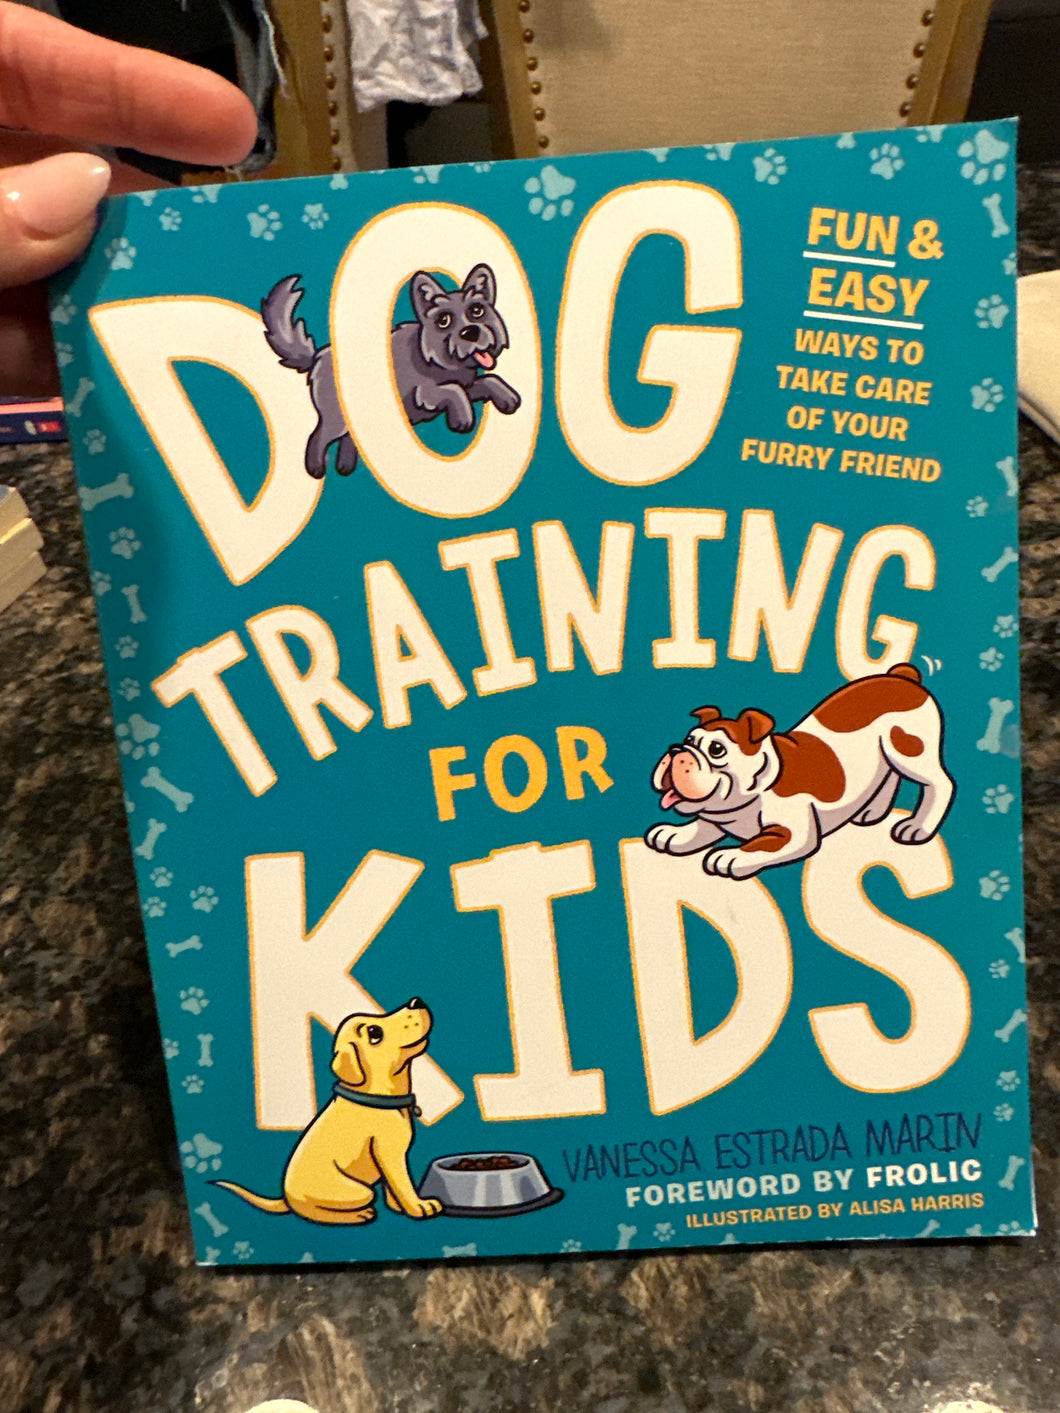 Dog training book for kids